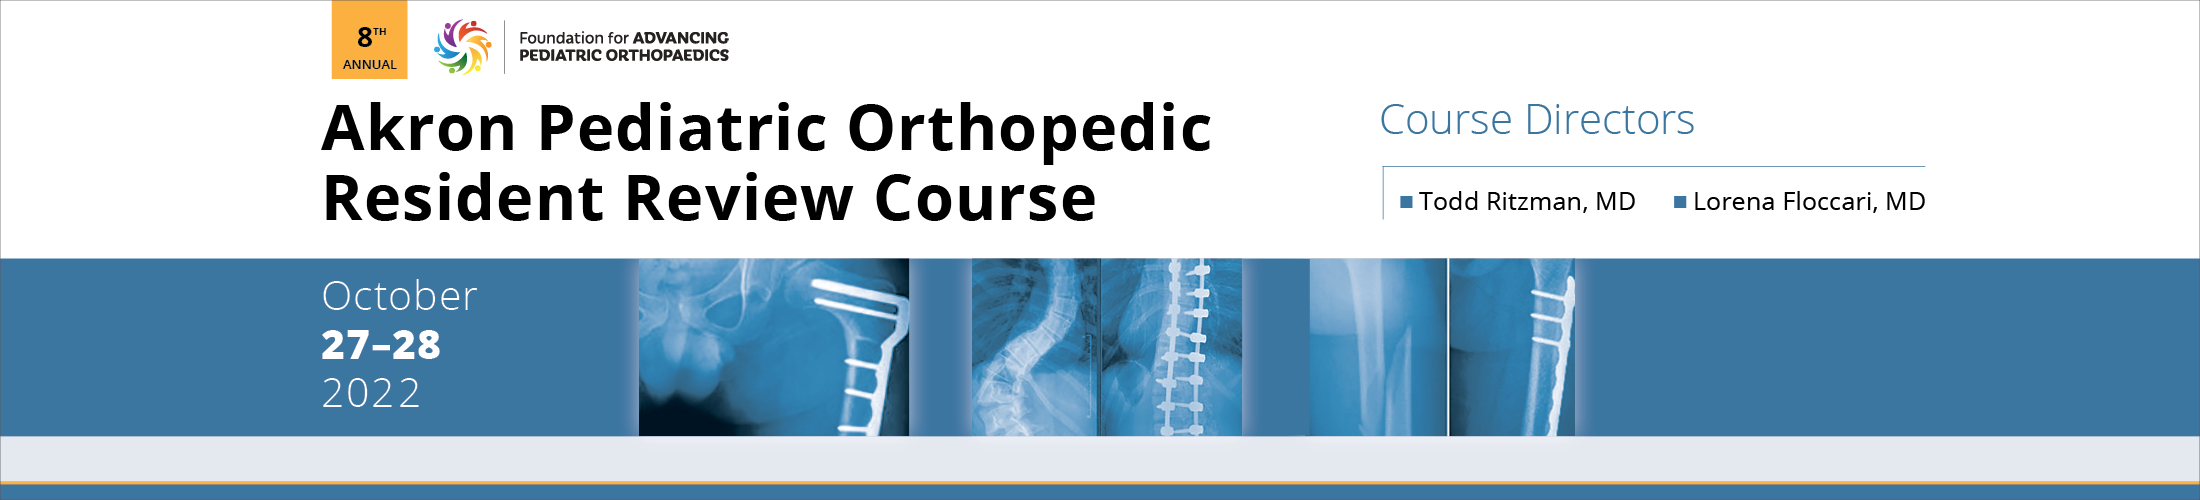 8th Annual Akron Pediatric Orthopedic Resident Review Course